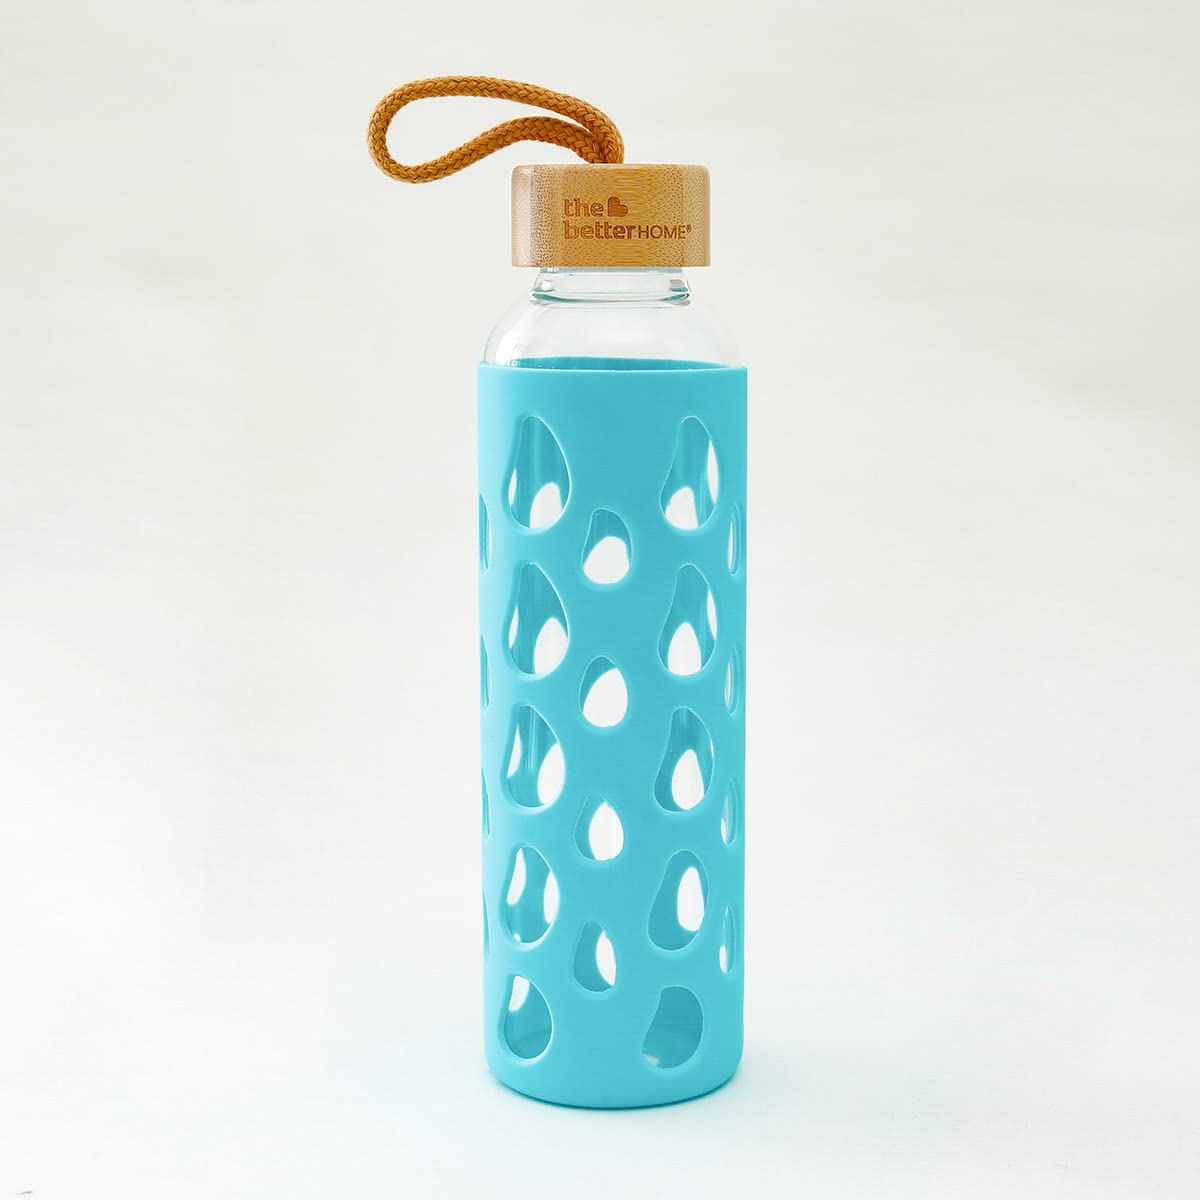 The Better Home Borosilicate Glass Water Bottle with Sleeve 550ml | Non Slip Silicon Sleeve & Bamboo Lid | Fridge Water Bottle For Home & Office (Light Blue, Pack of 1)